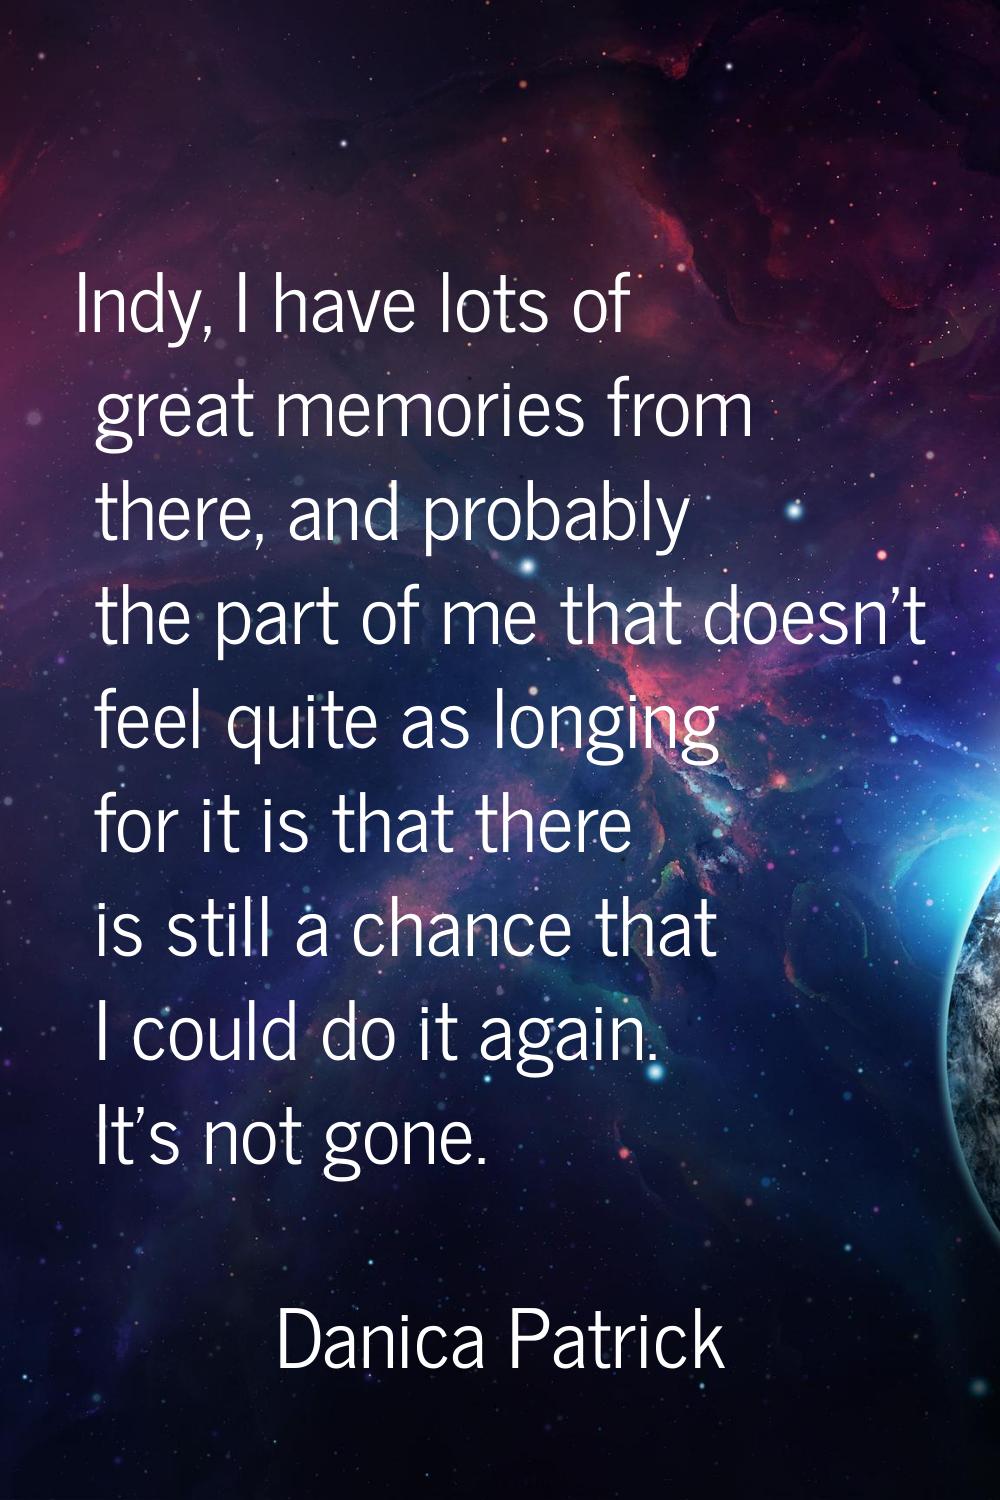 Indy, I have lots of great memories from there, and probably the part of me that doesn't feel quite